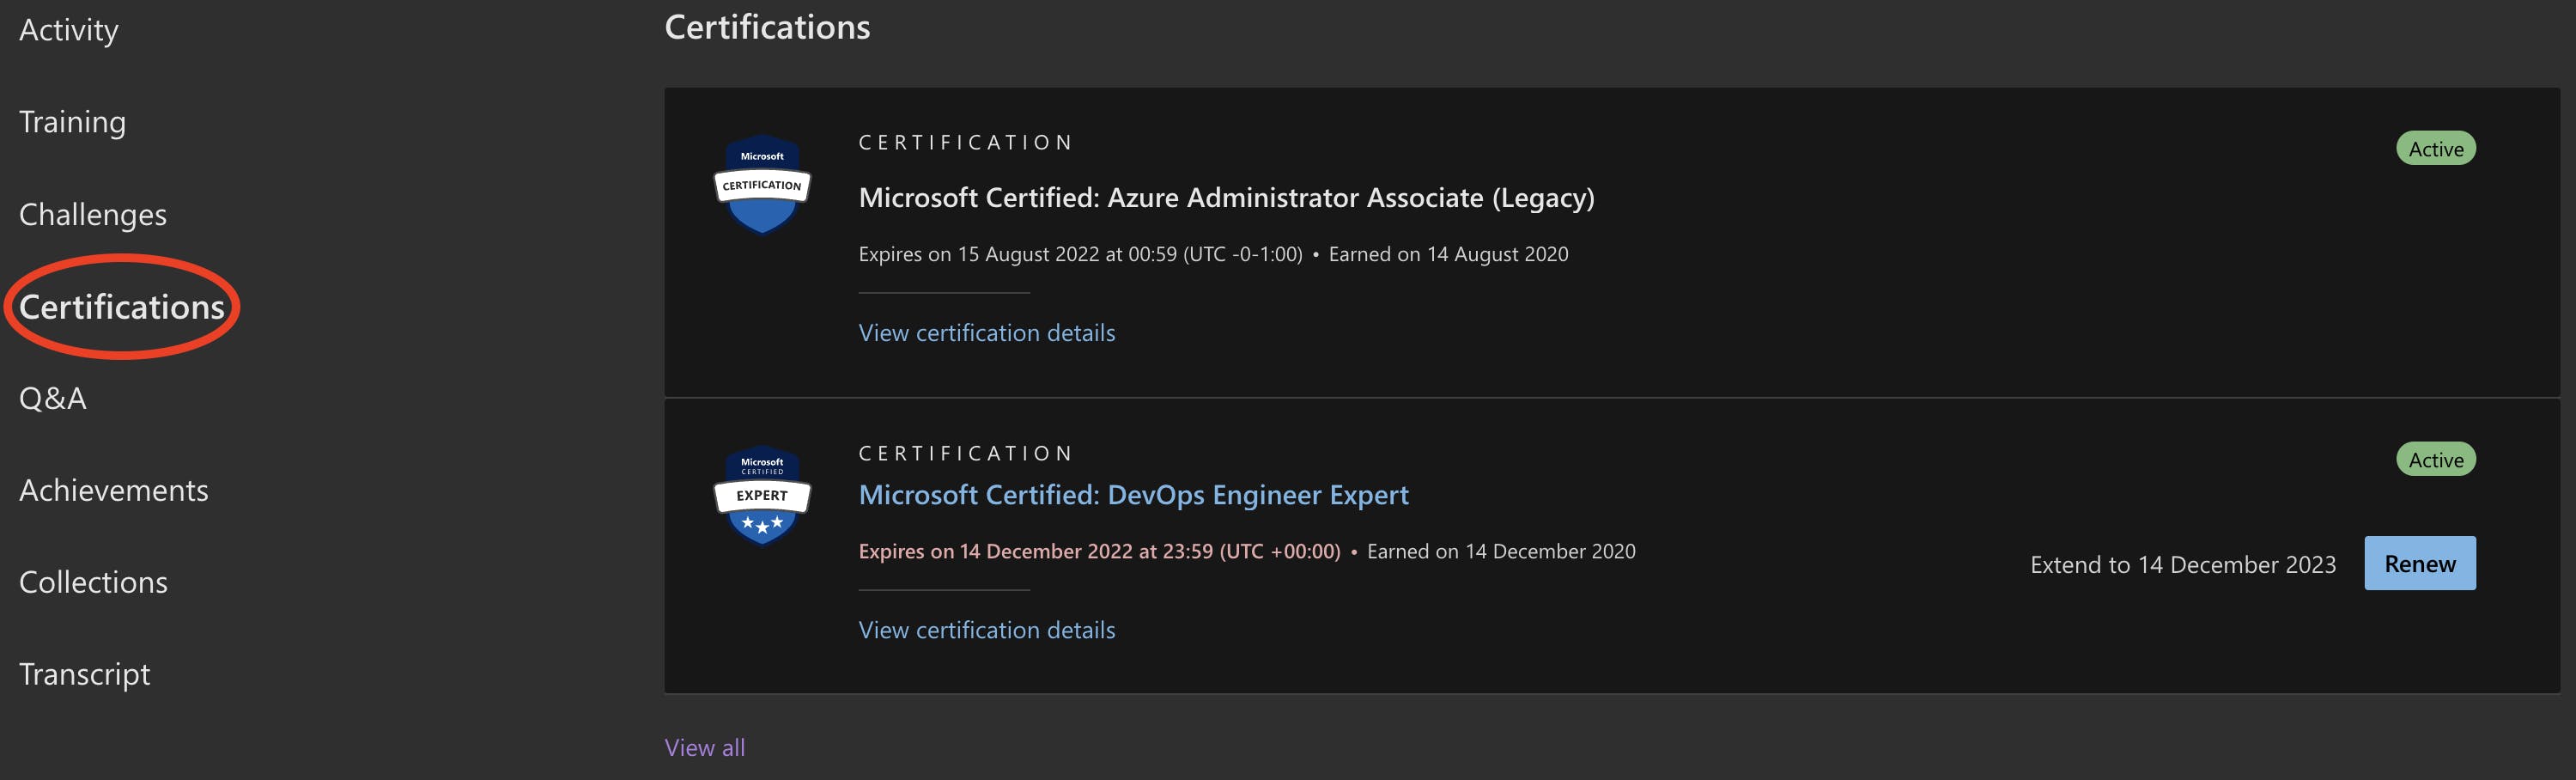 Certification tab within Profile